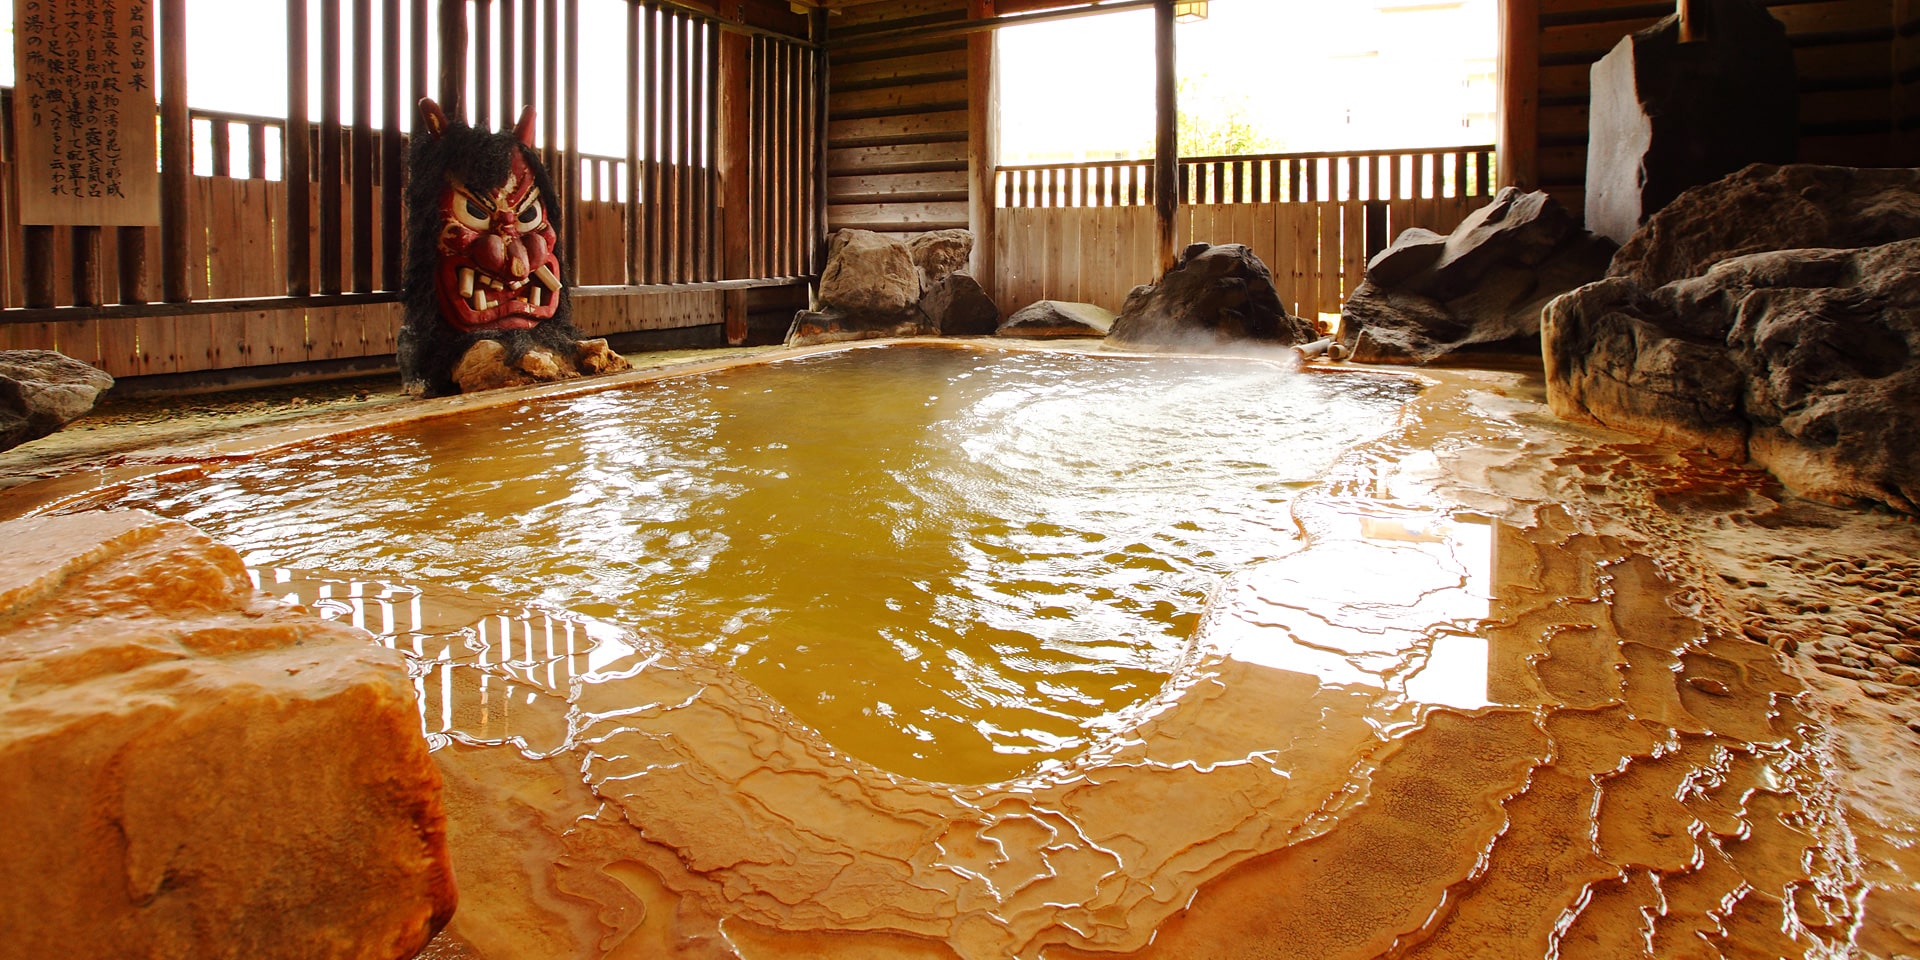 Kanpu-san Experience the Traditional Culture of Namahage at Oga Onsen!